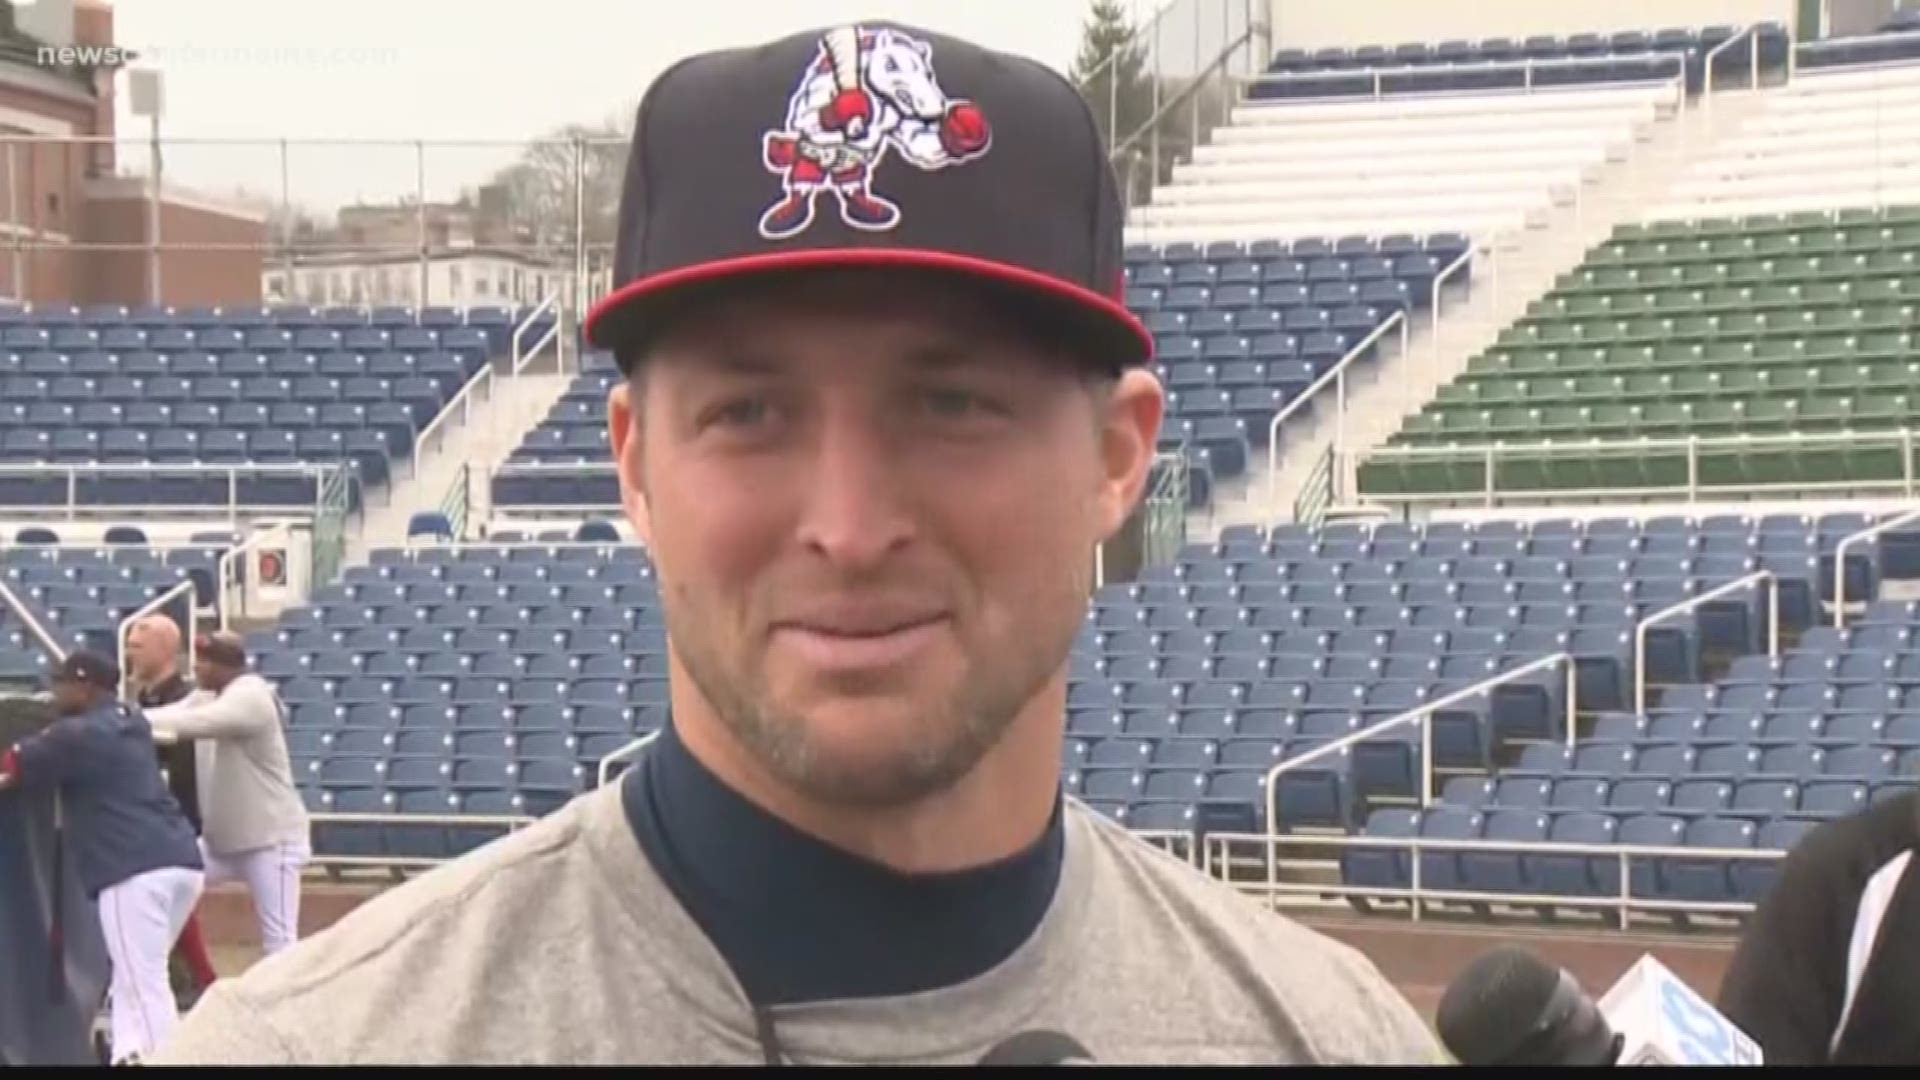 NOW: Tim Tebow in Portland